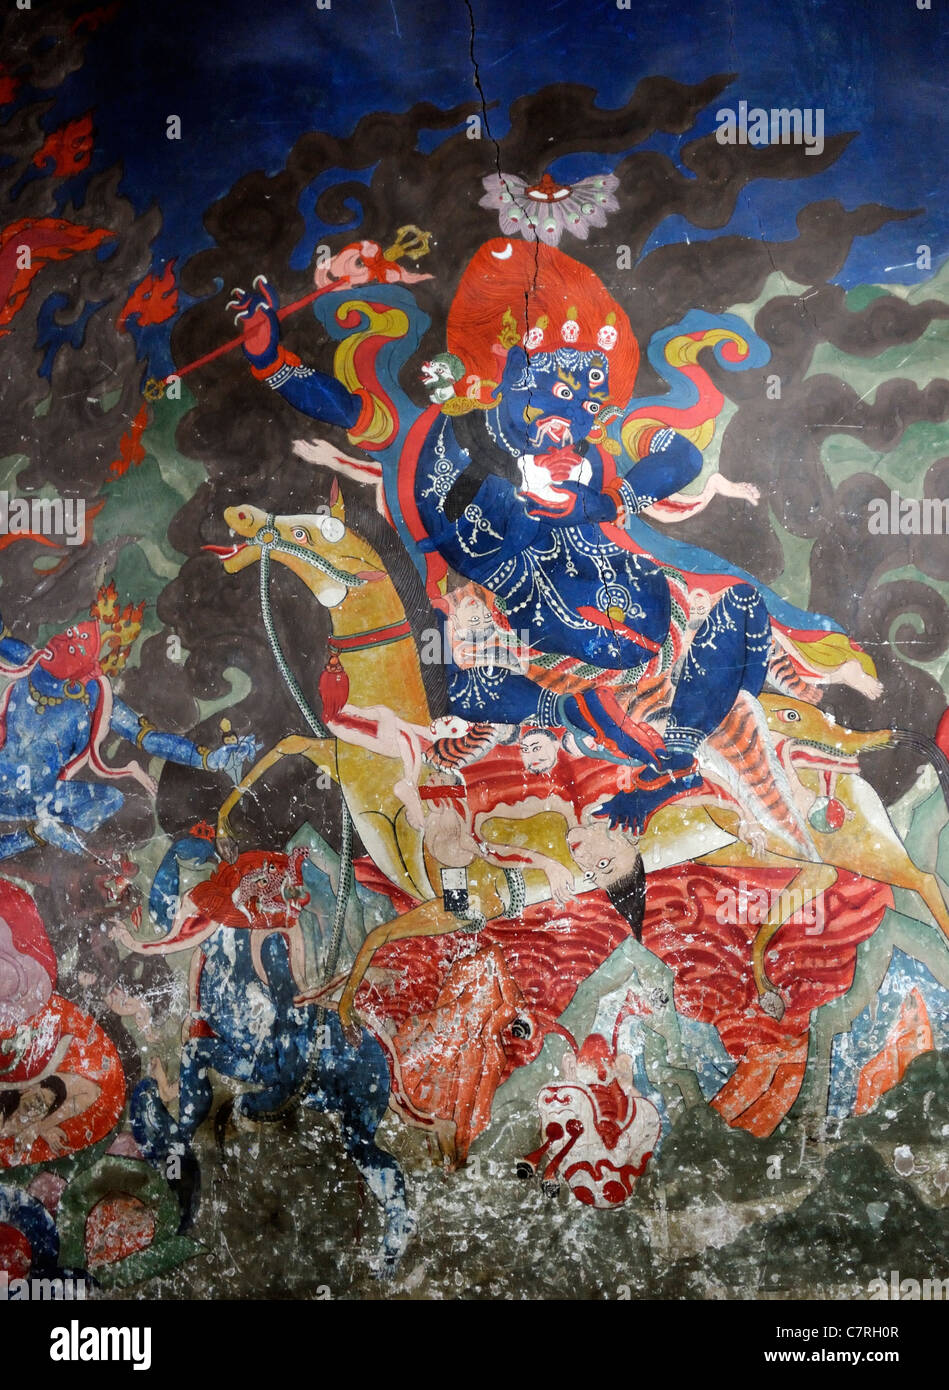 A wall painting of Shri Devi, Palden Lhamo, the Glorious Goddess with her red hair, riding on her three eyed white mule. Stock Photo